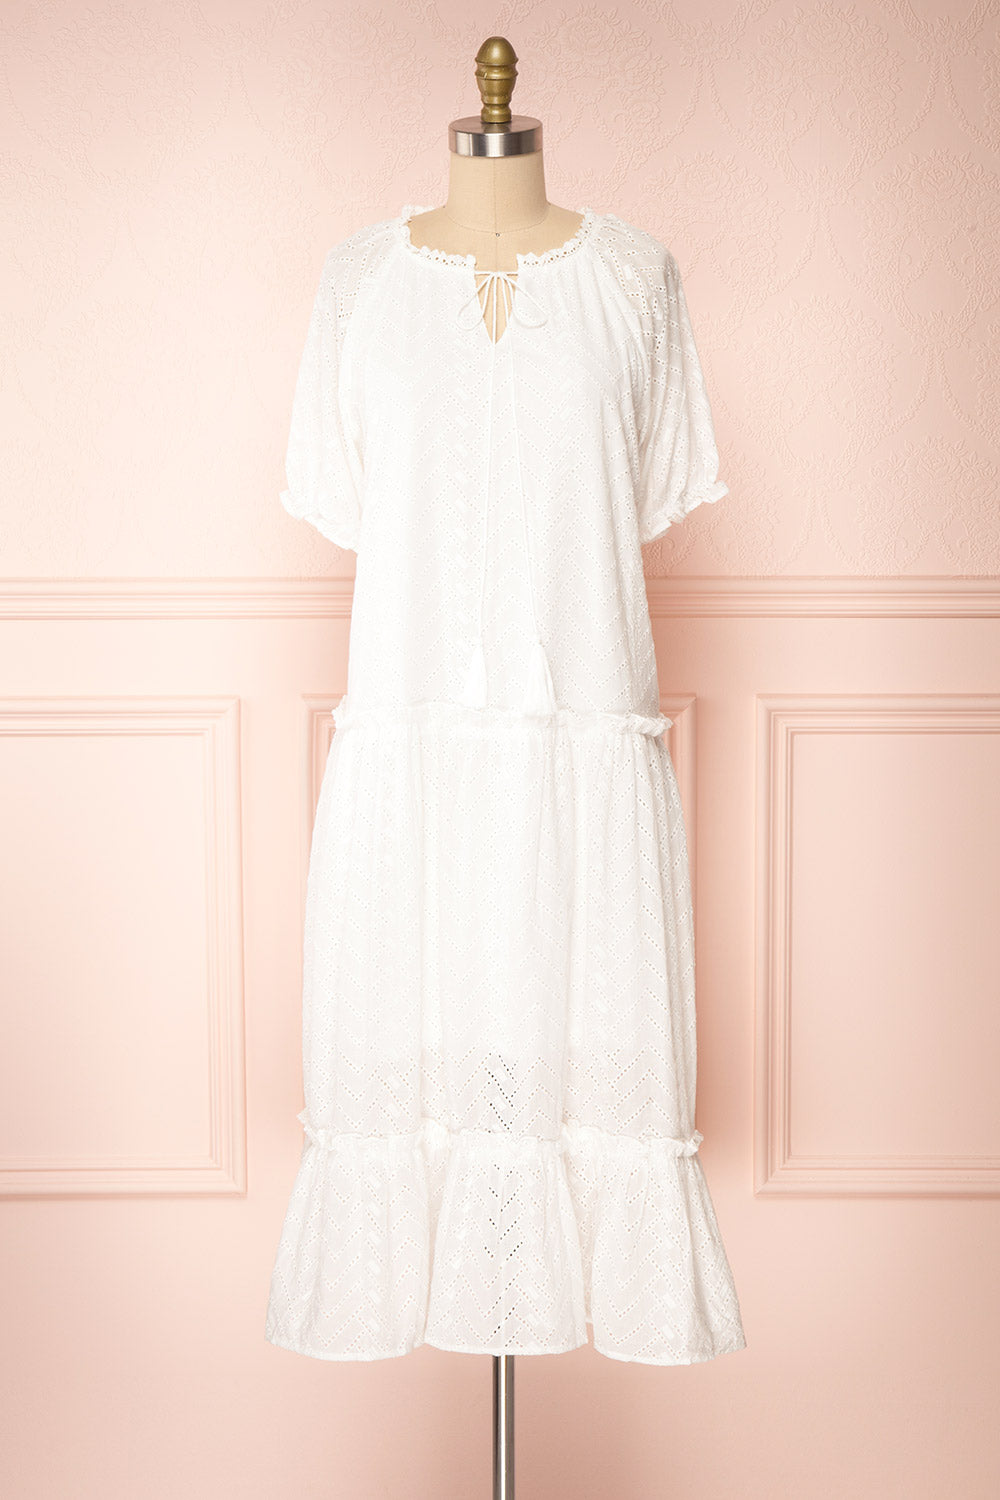 Mativa White Embroidered Short Sleeve Dress | Boutique 1861 front view 